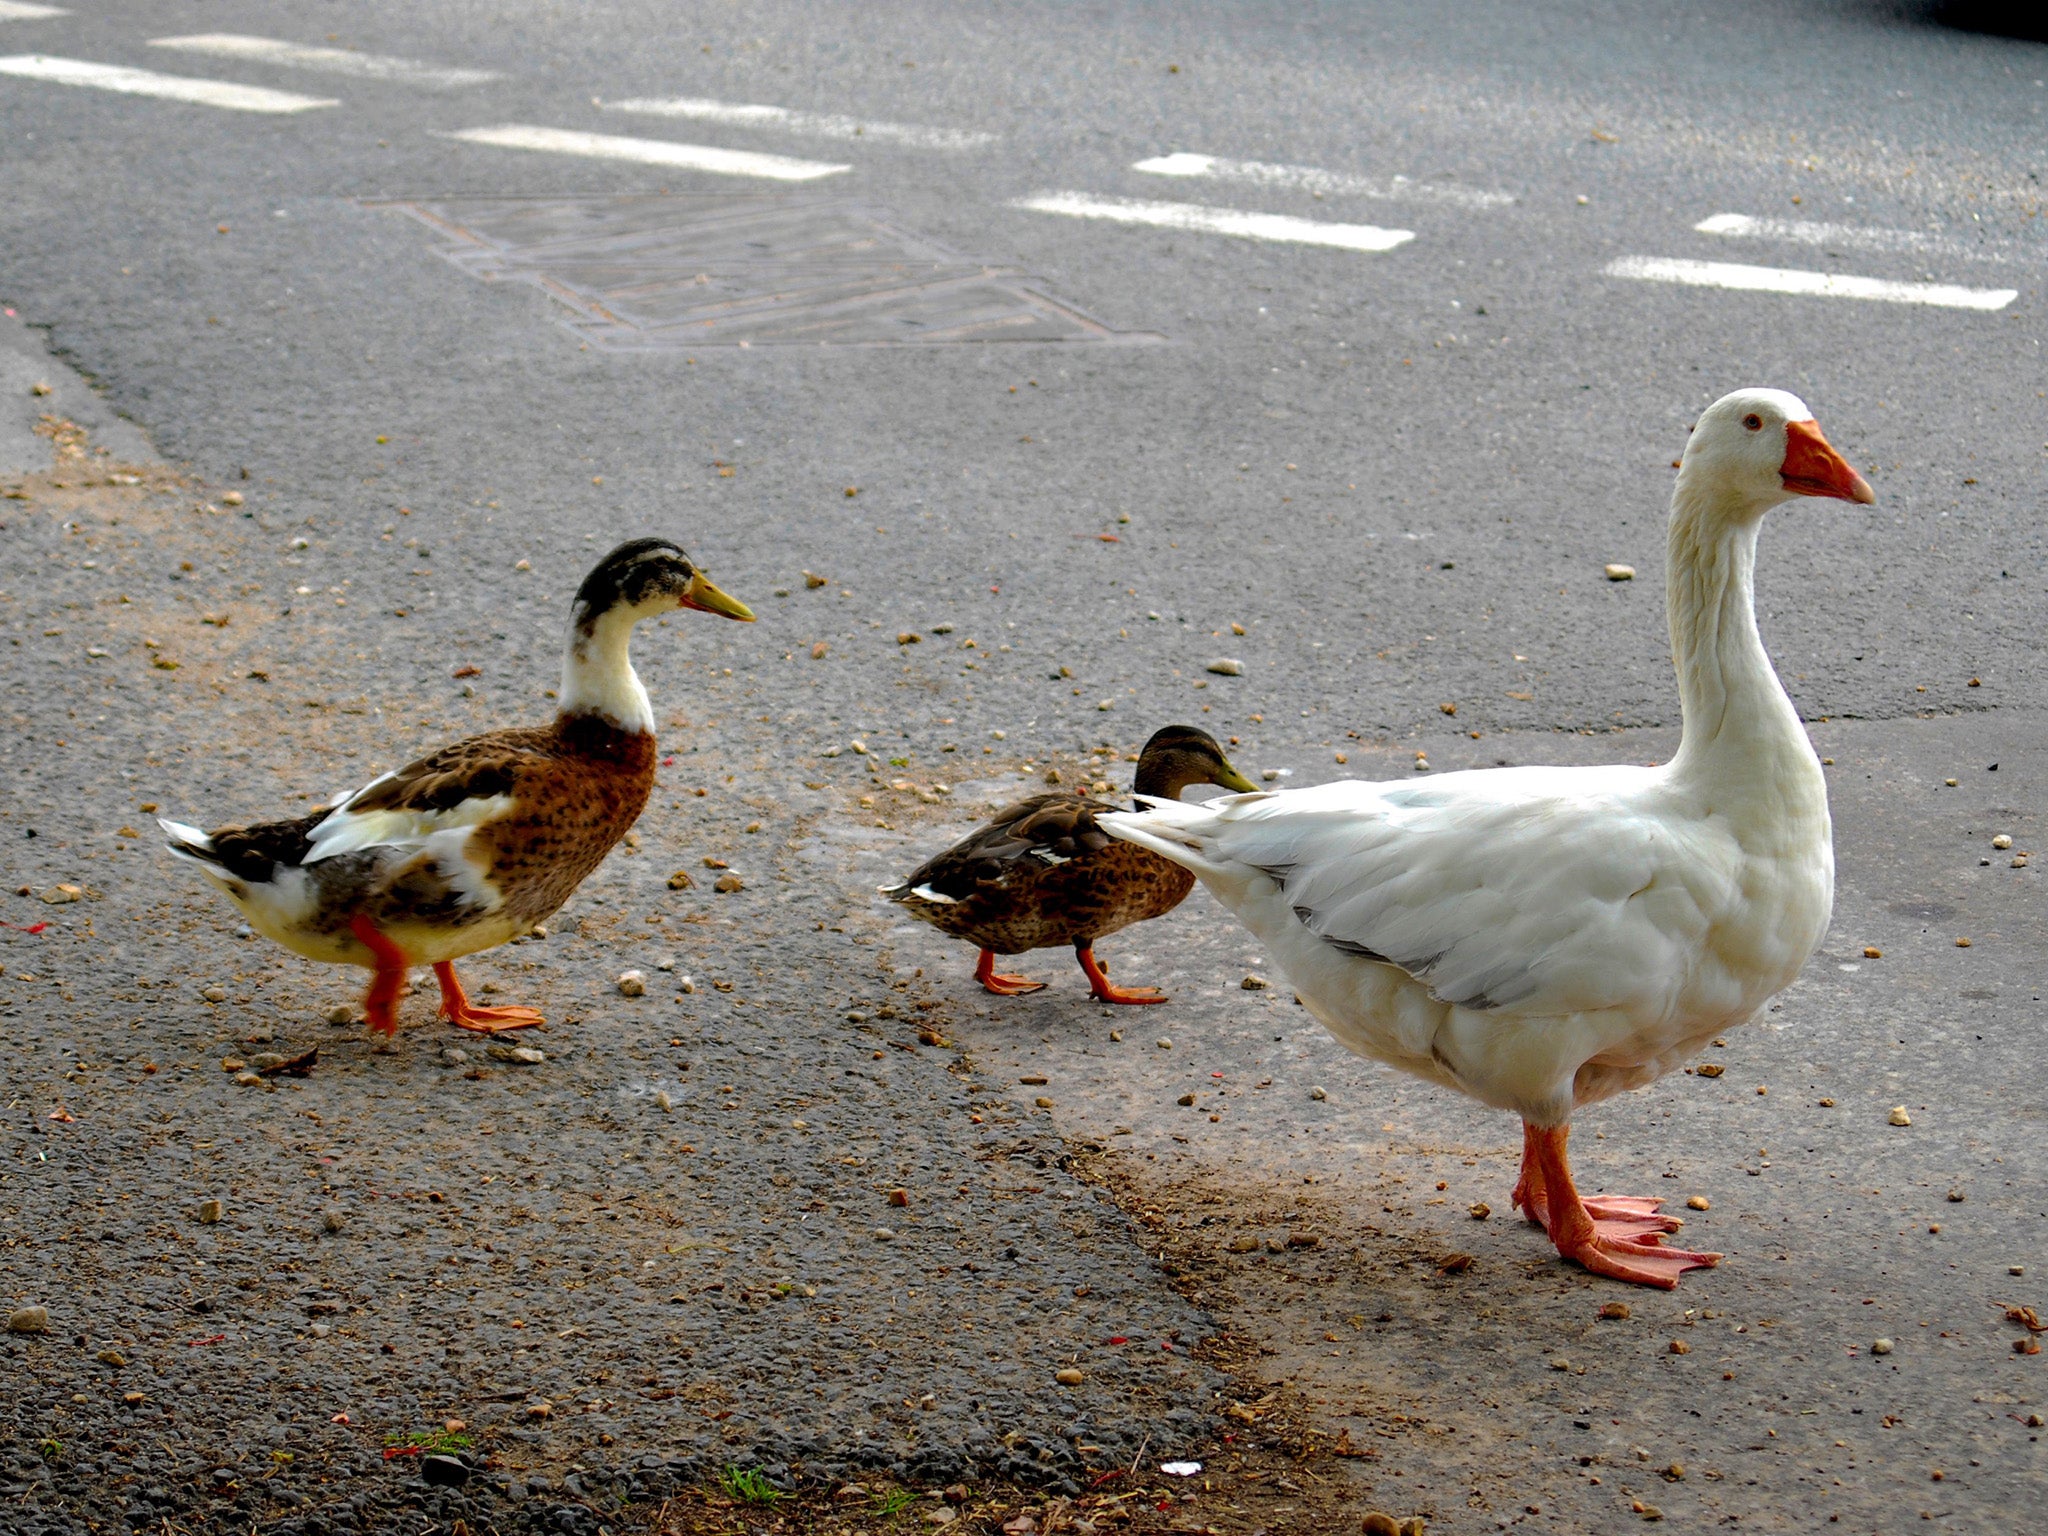 The goose was a popular local figure and was often seen guiding young birds across the road